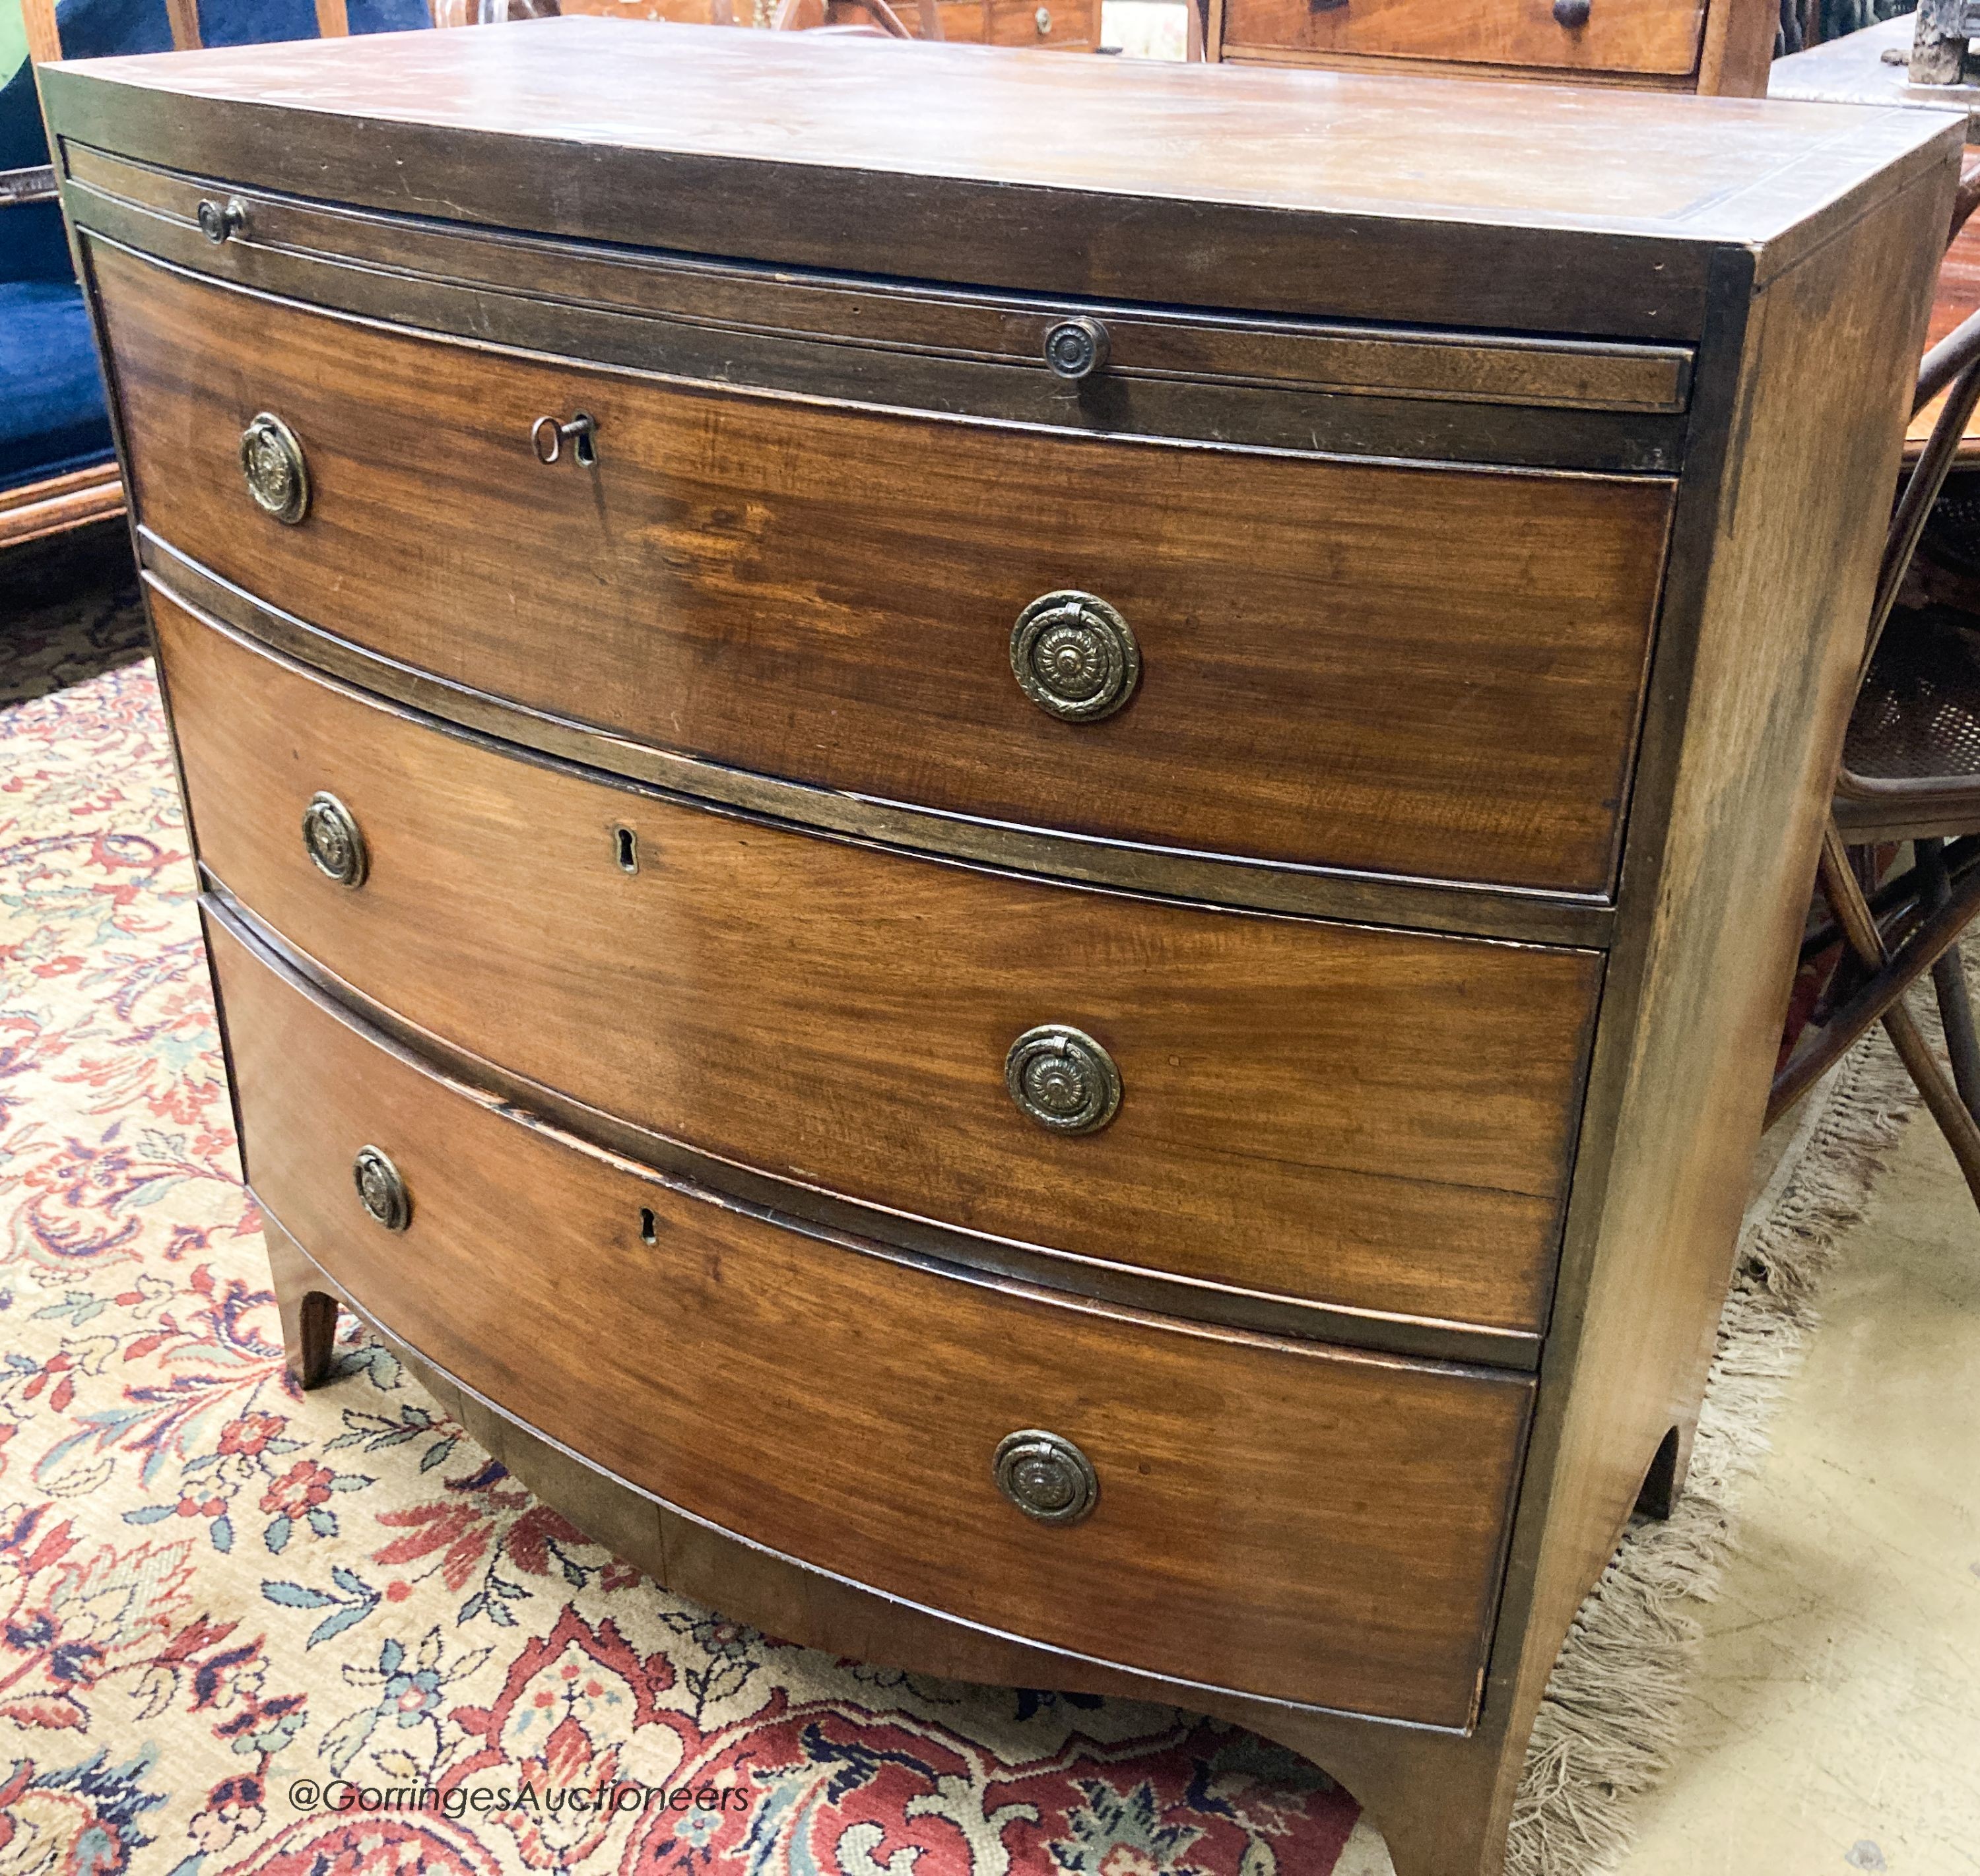 A Regency banded mahogany bowfront chest, width 91cm, depth 54cm, height 92cm